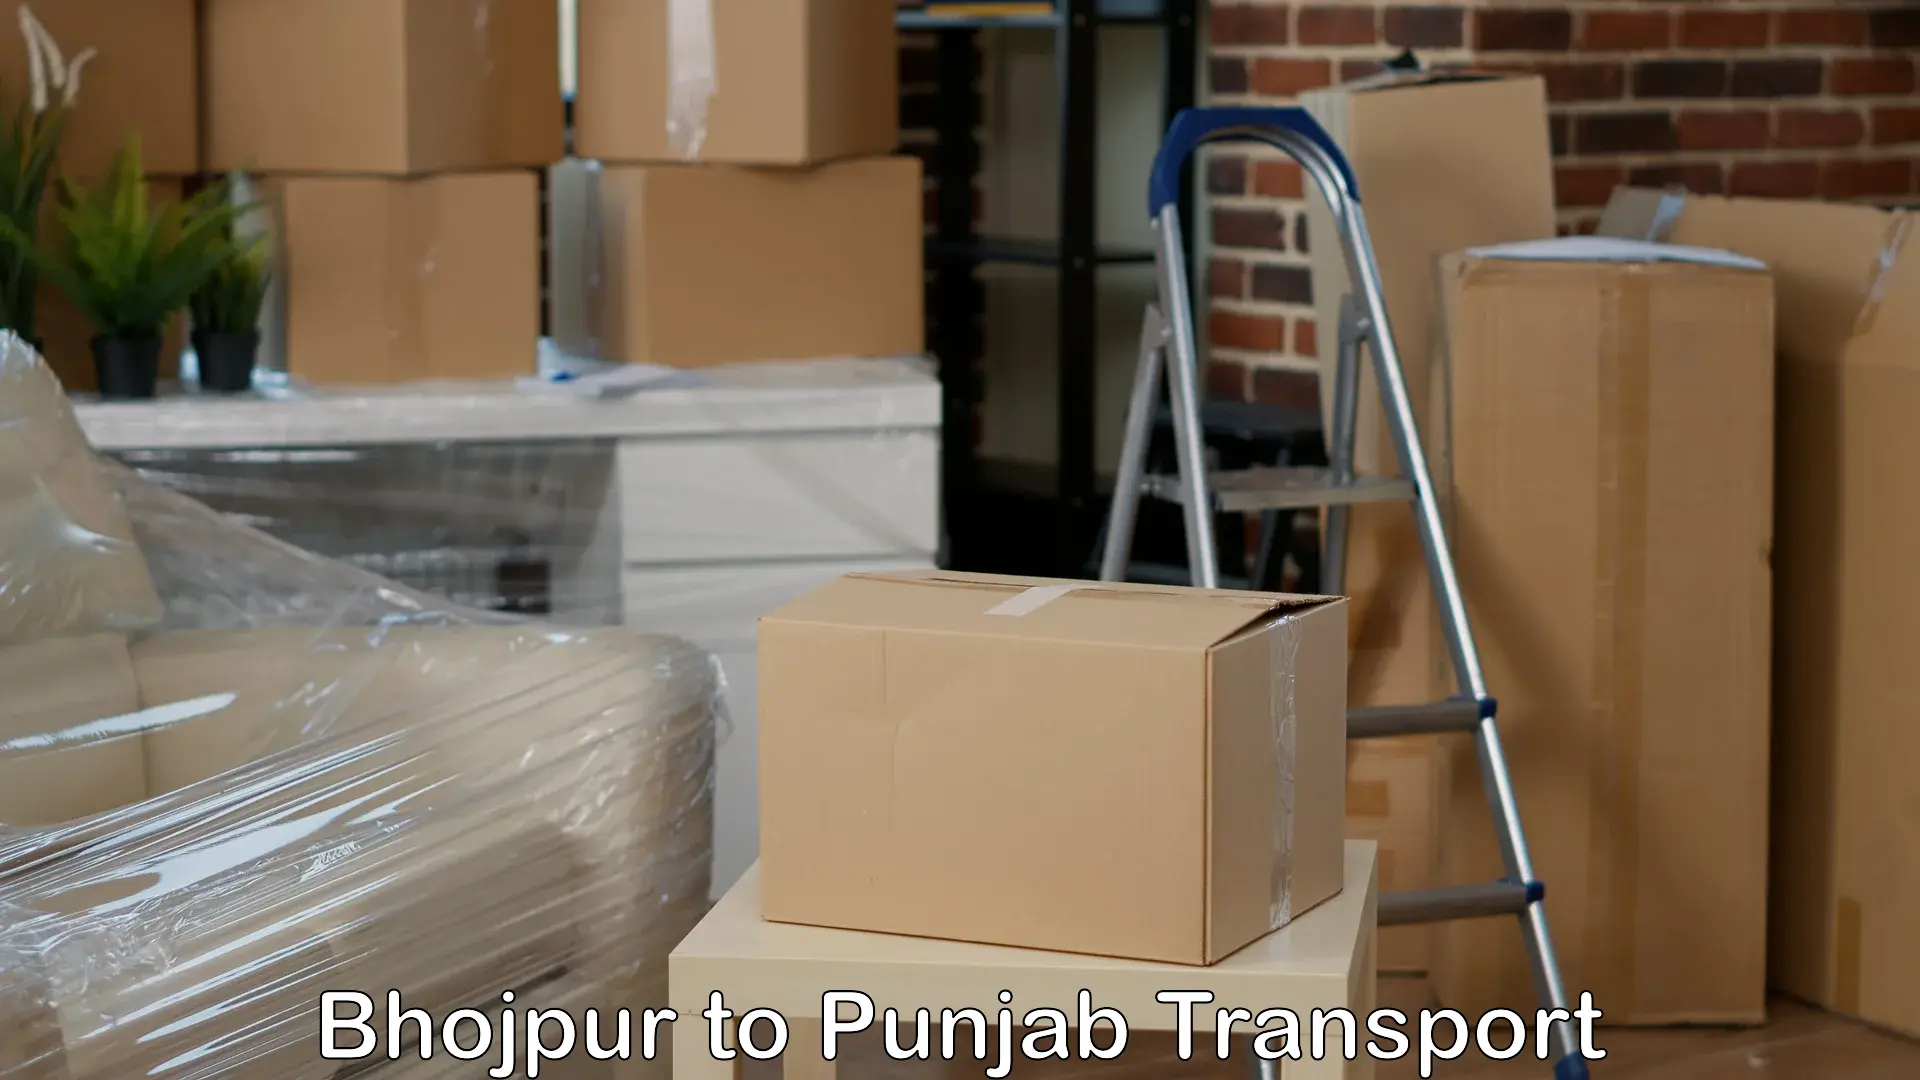 Truck transport companies in India Bhojpur to Phillaur